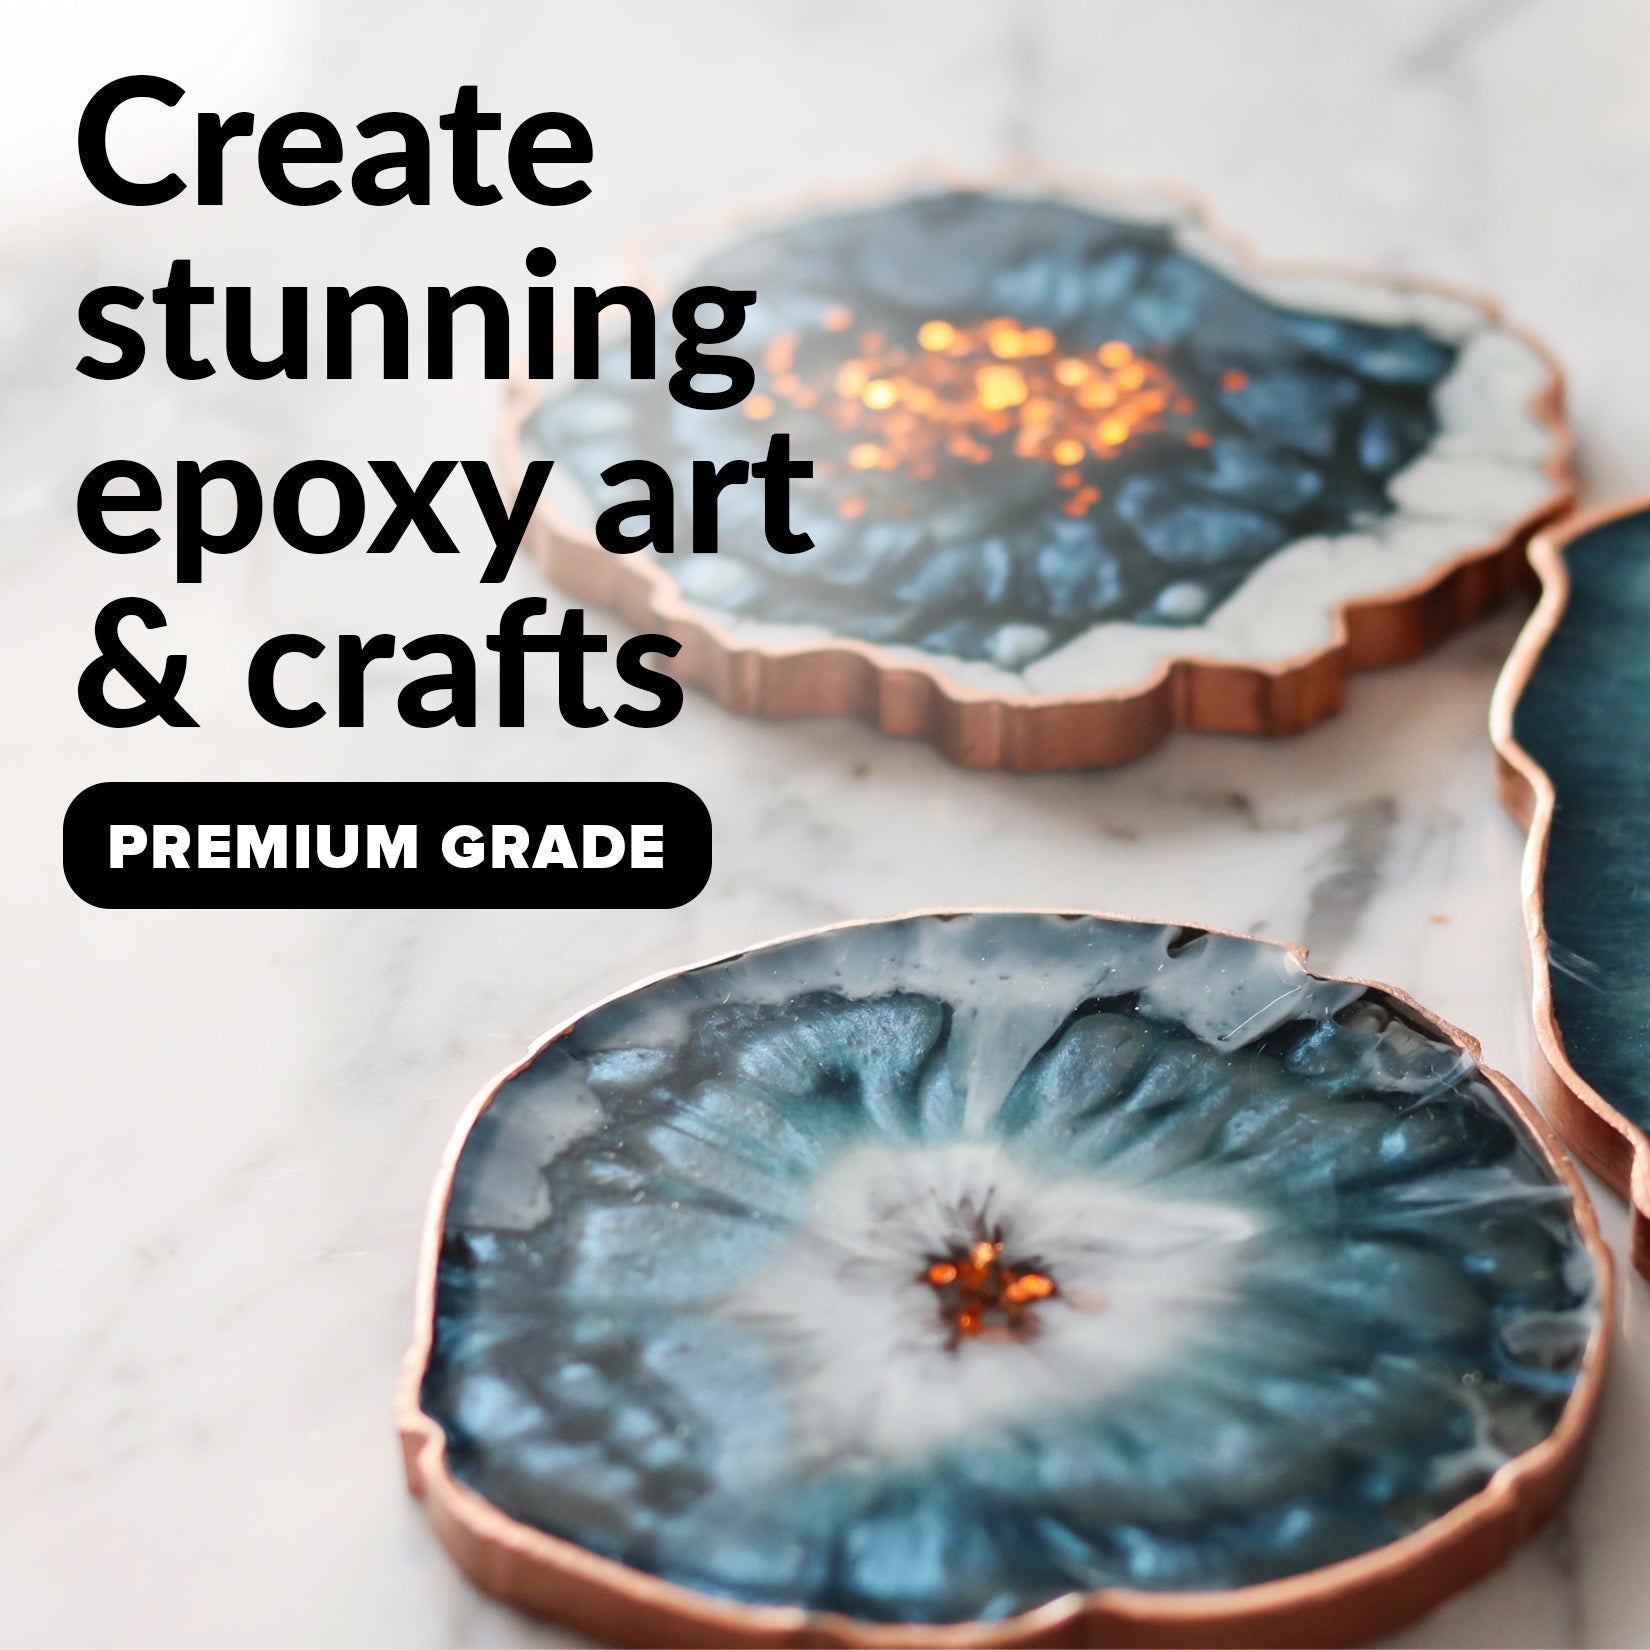 Craft Culture Epoxy Resin Kit - 16oz Ultra Clear Epoxy Starter Set for  Crafts, Molds, Jewelry Making & Wood Coating. 8oz Resin + 8oz Hardener.  Scratch-Resistant, Anti-Yellowing with Acrylic Finish 